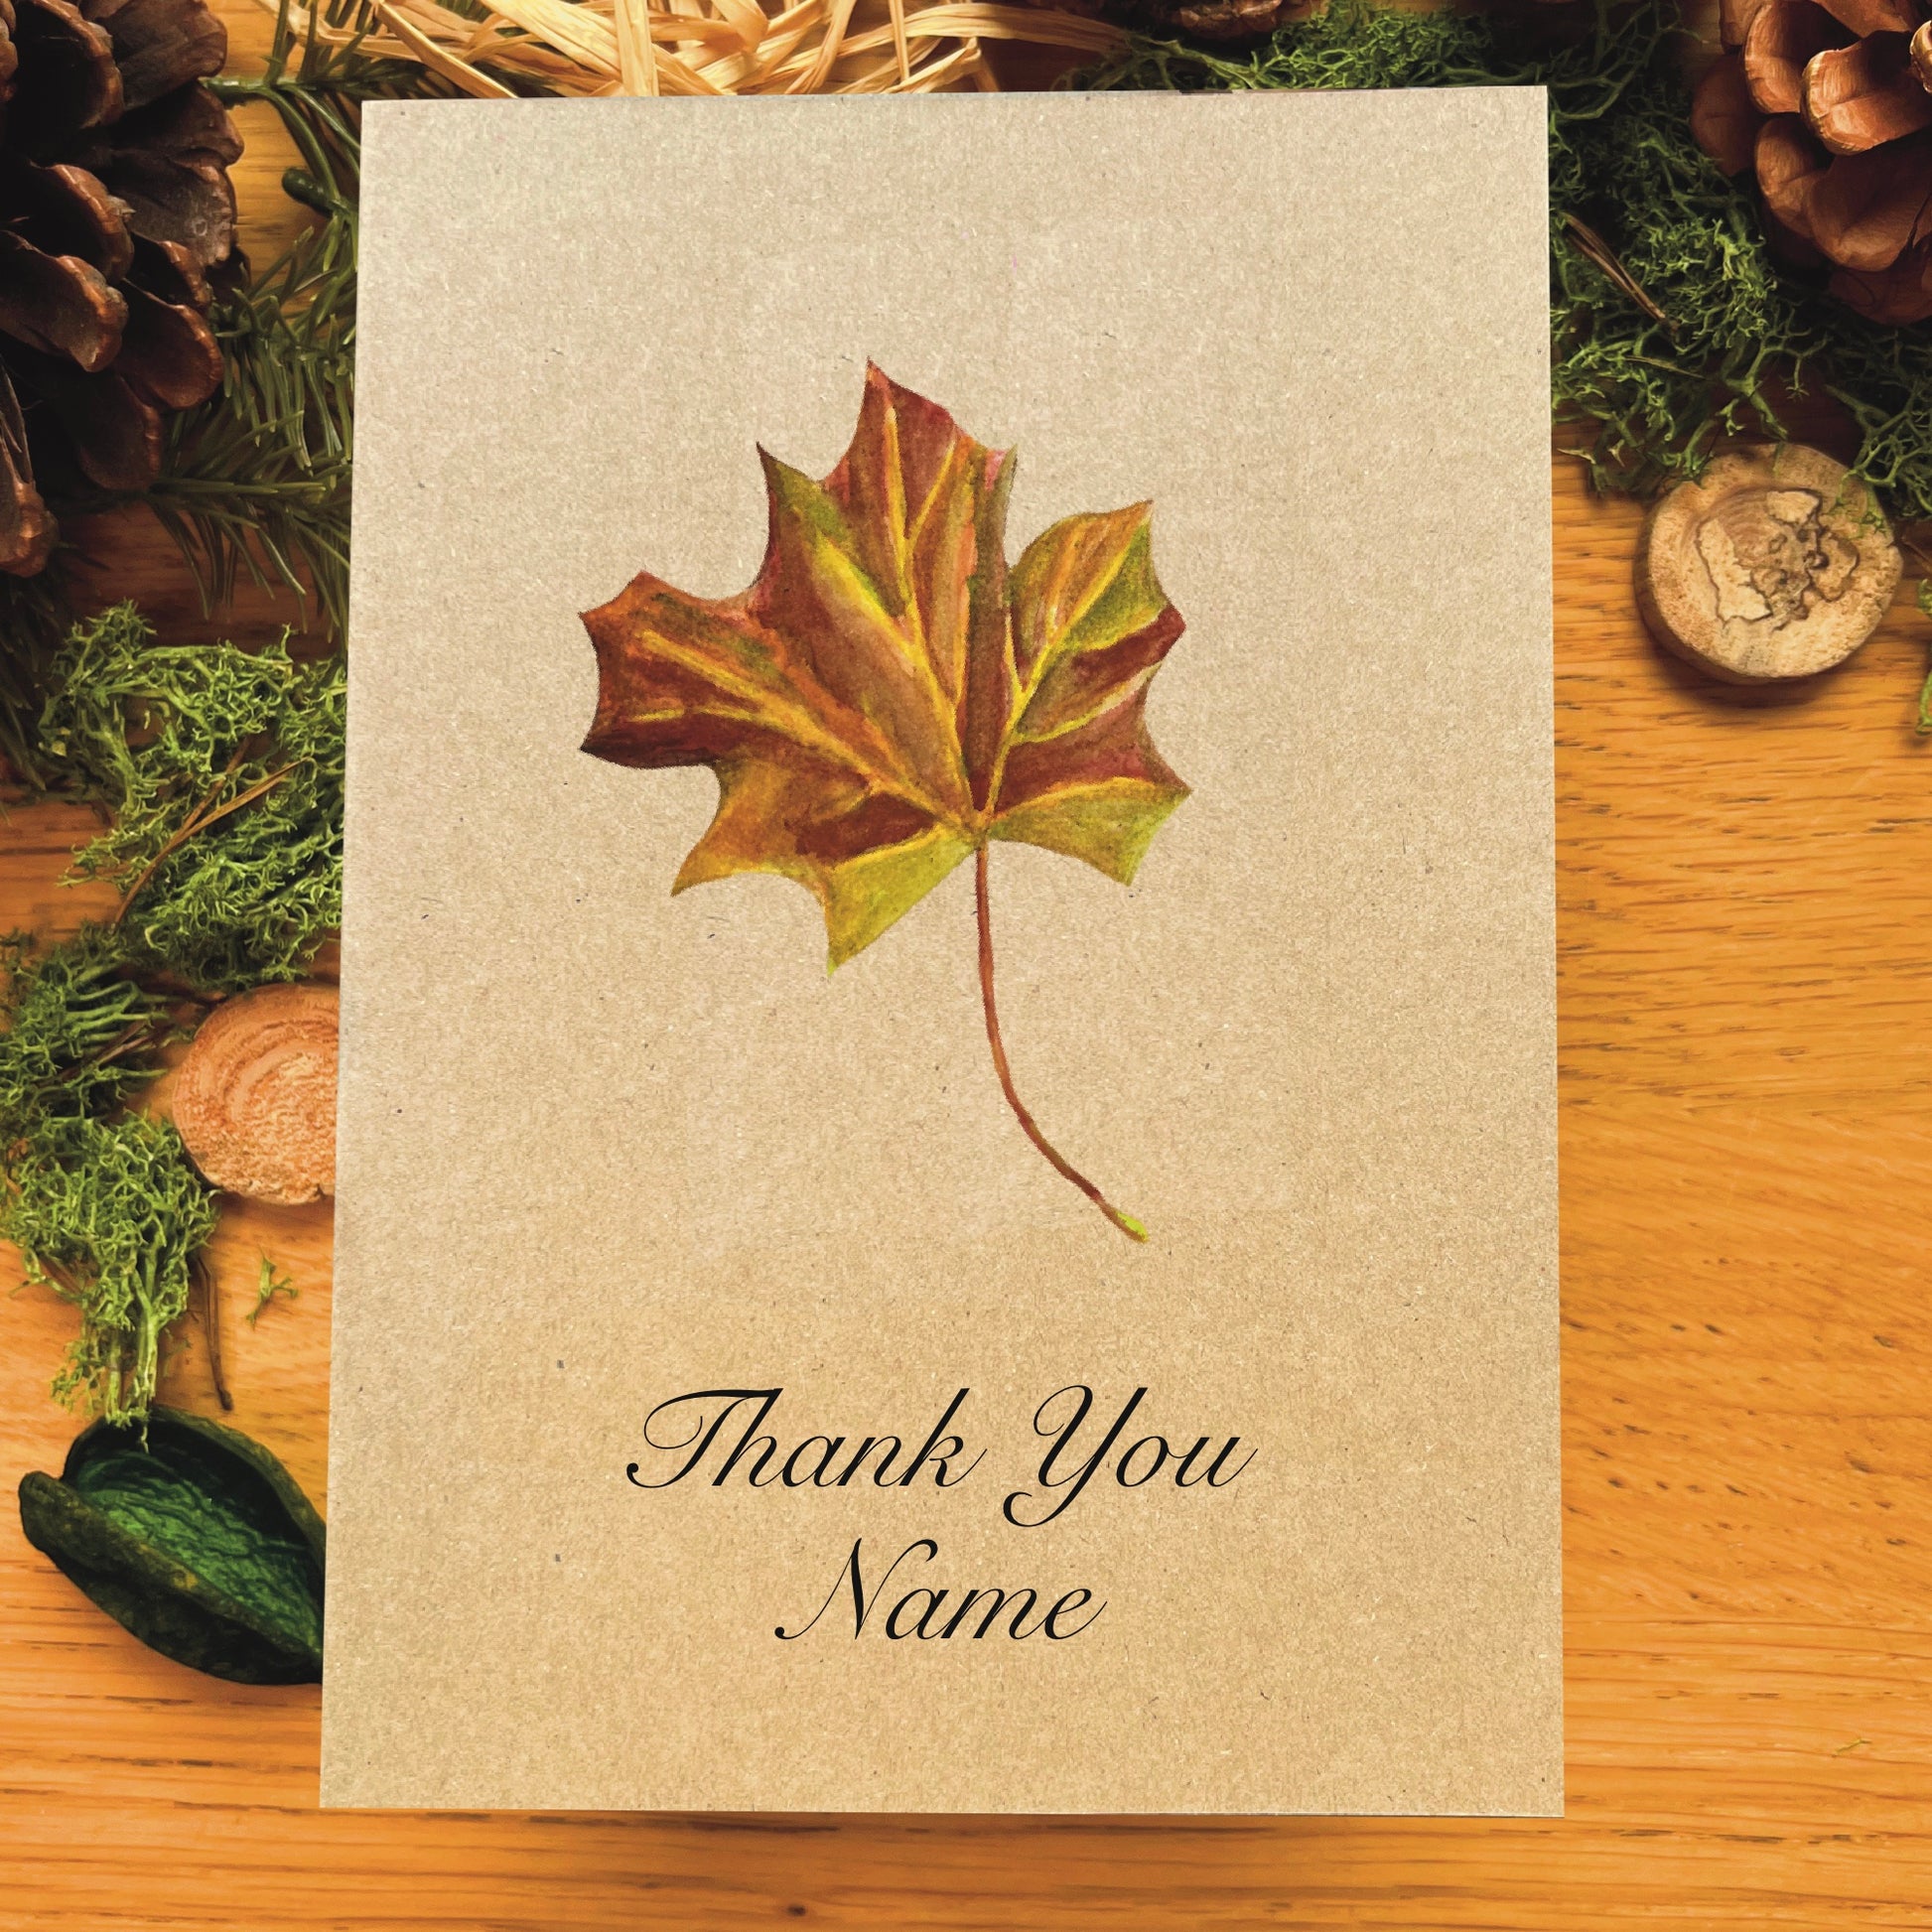 Maple leaf illustrated in watercolour attached to Manila recycled greetings card on a wooden desk, with text script Thank You Name underneath the illustration